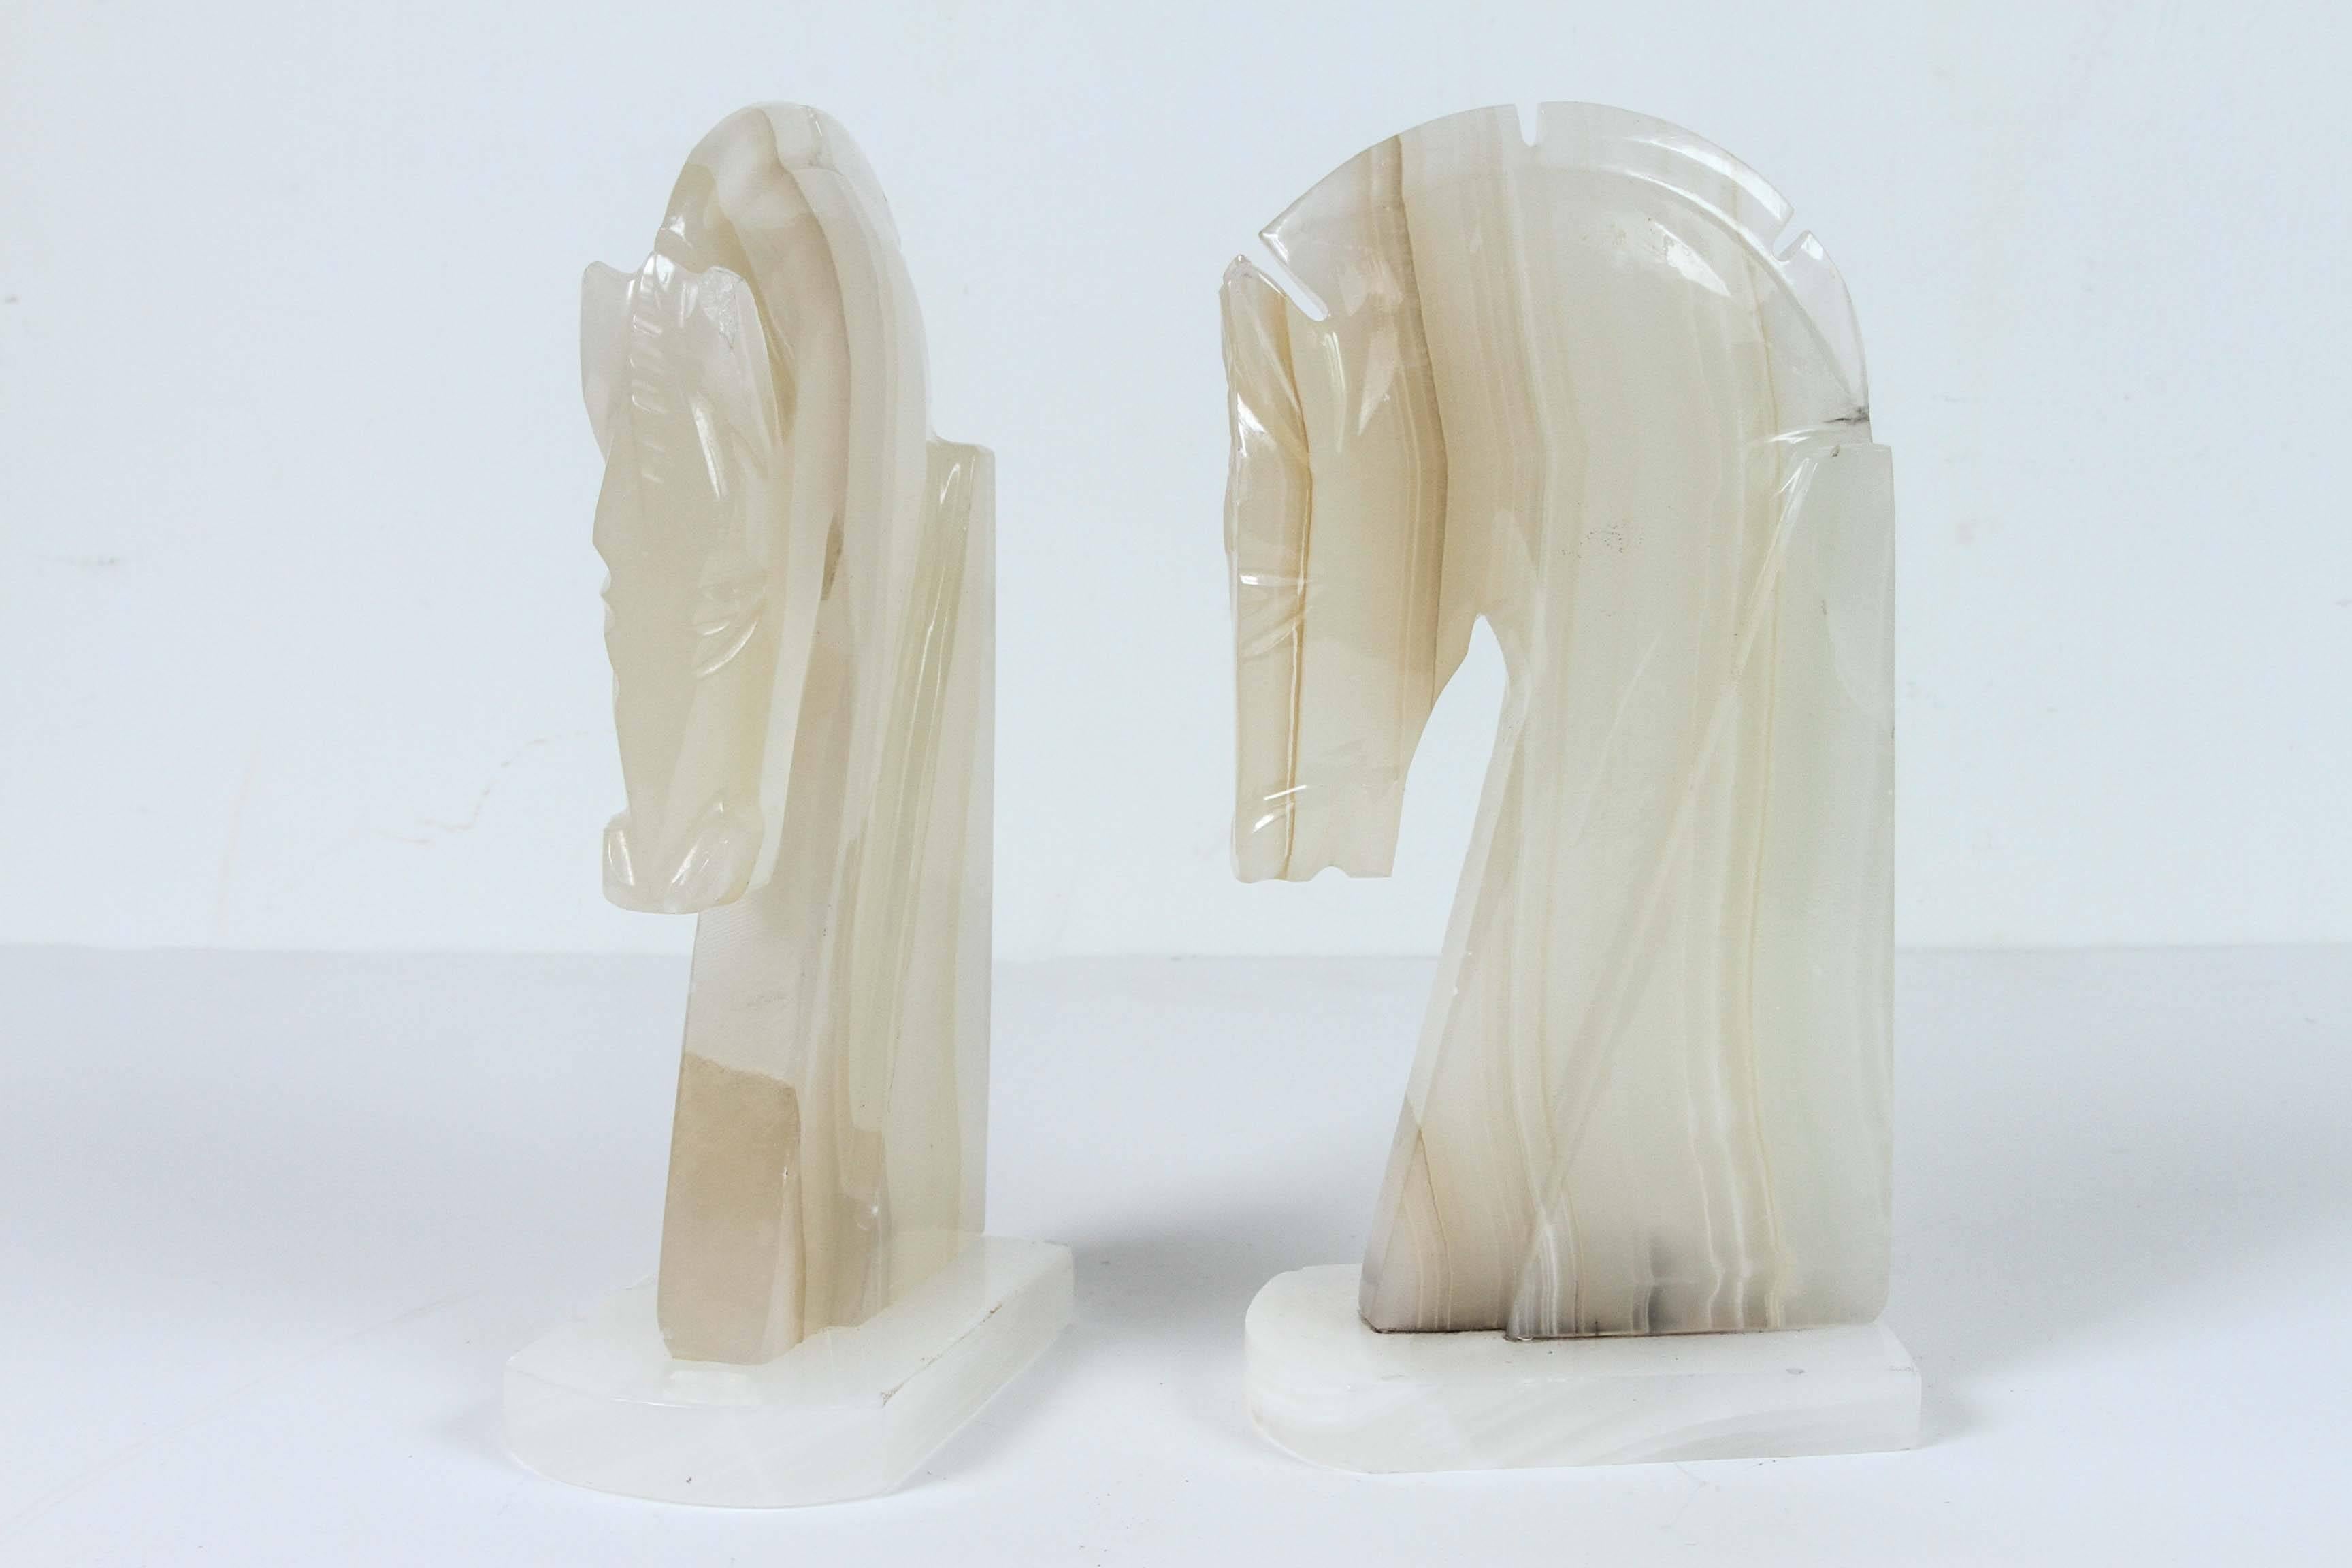 Pair of Art Deco style stylized horses head bookends.
Vintage set of bookends, hand-carved in marble in a shade of light ivory and browns.
Hermes style horses, great modern design.
Measures: Each horse head measure 9" x 2"5 x